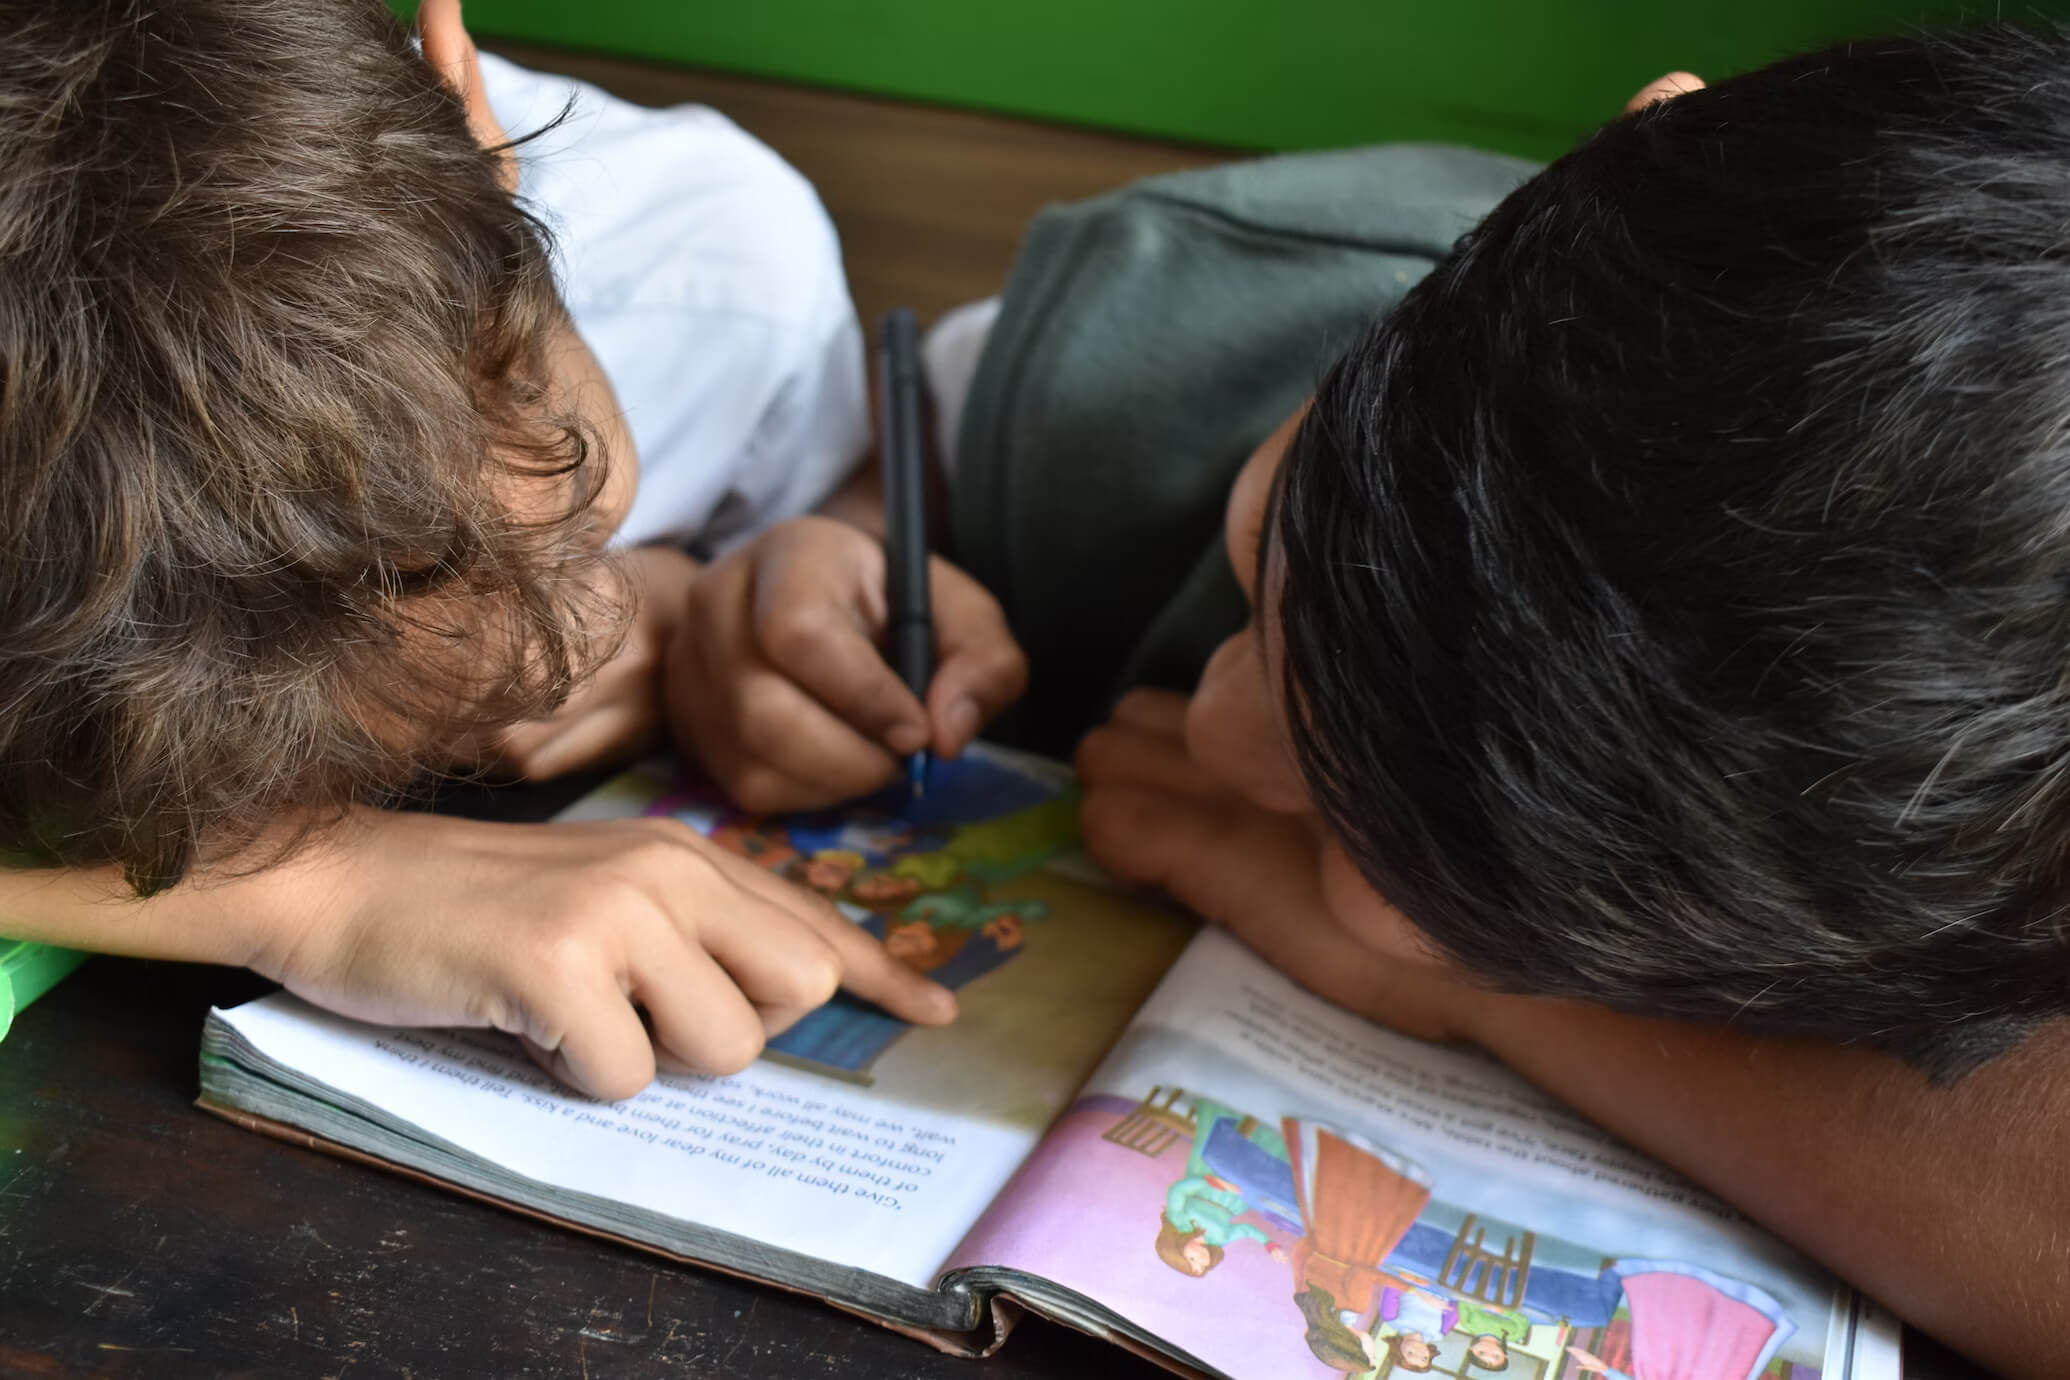 Two children bent over writing in a book together.